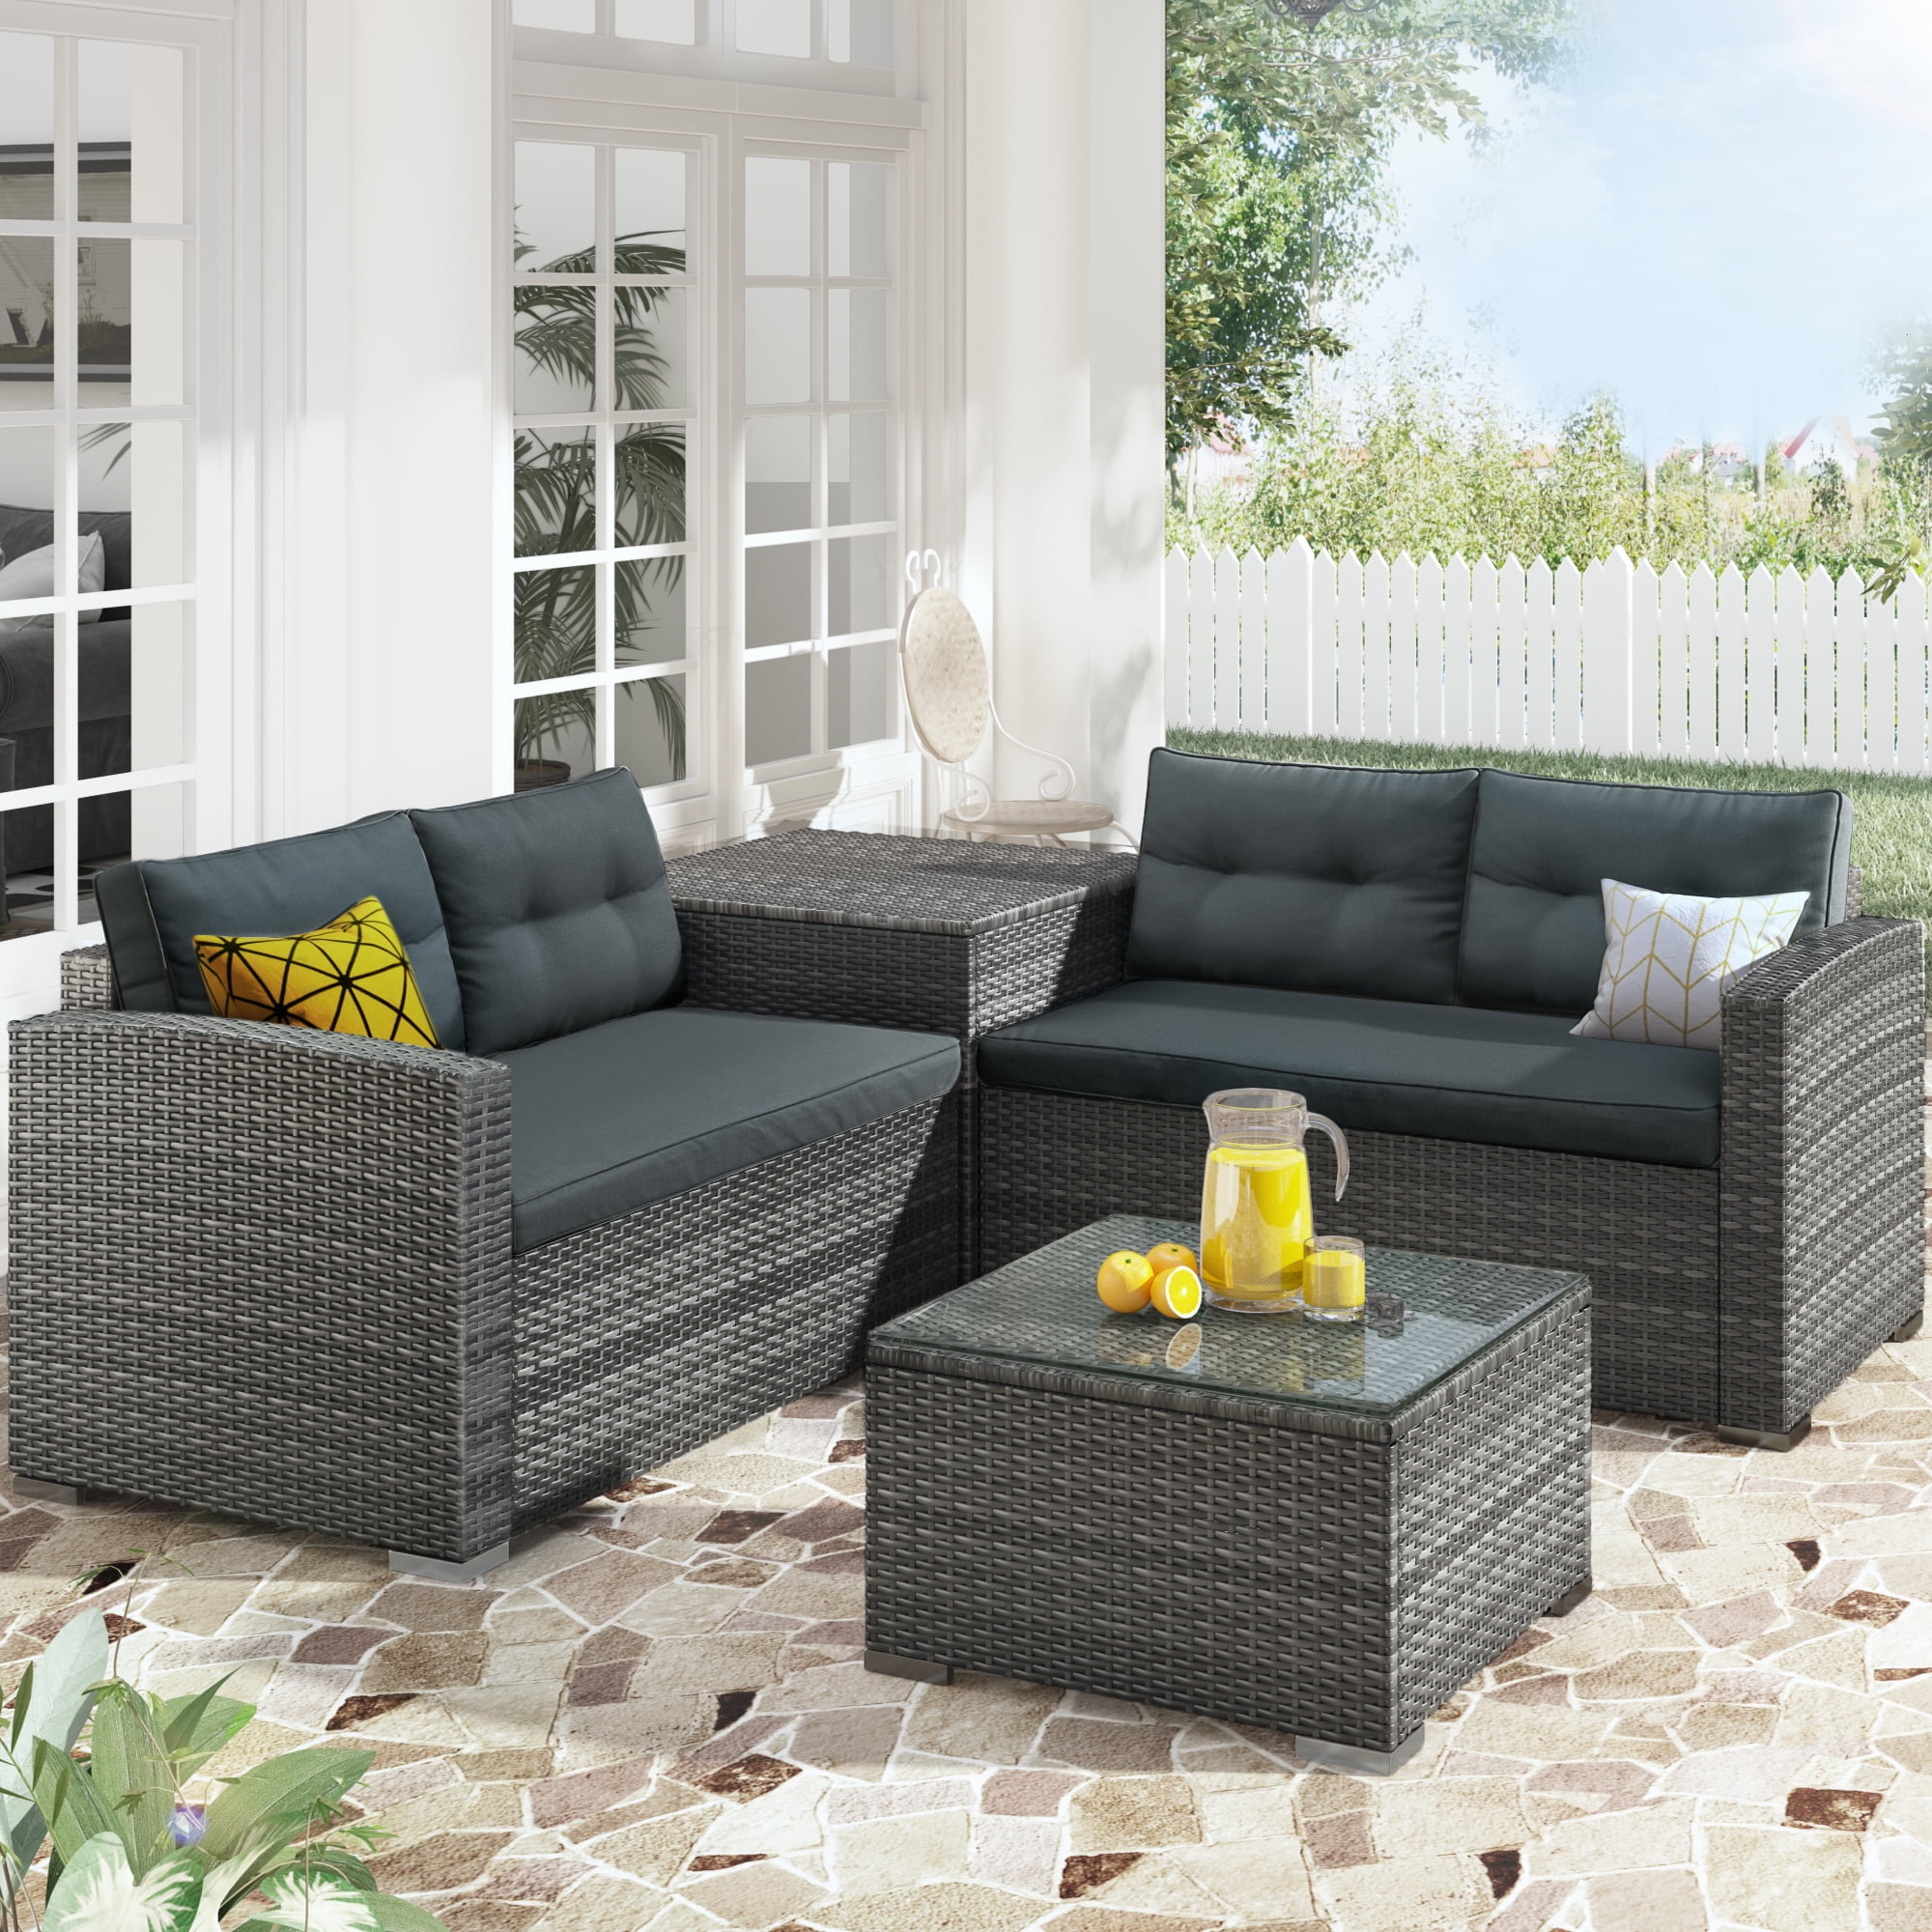 4PC Rattan Sofa Table Set Patio Outdoor Wicker Couch Furniture Kit w/ Cushion 